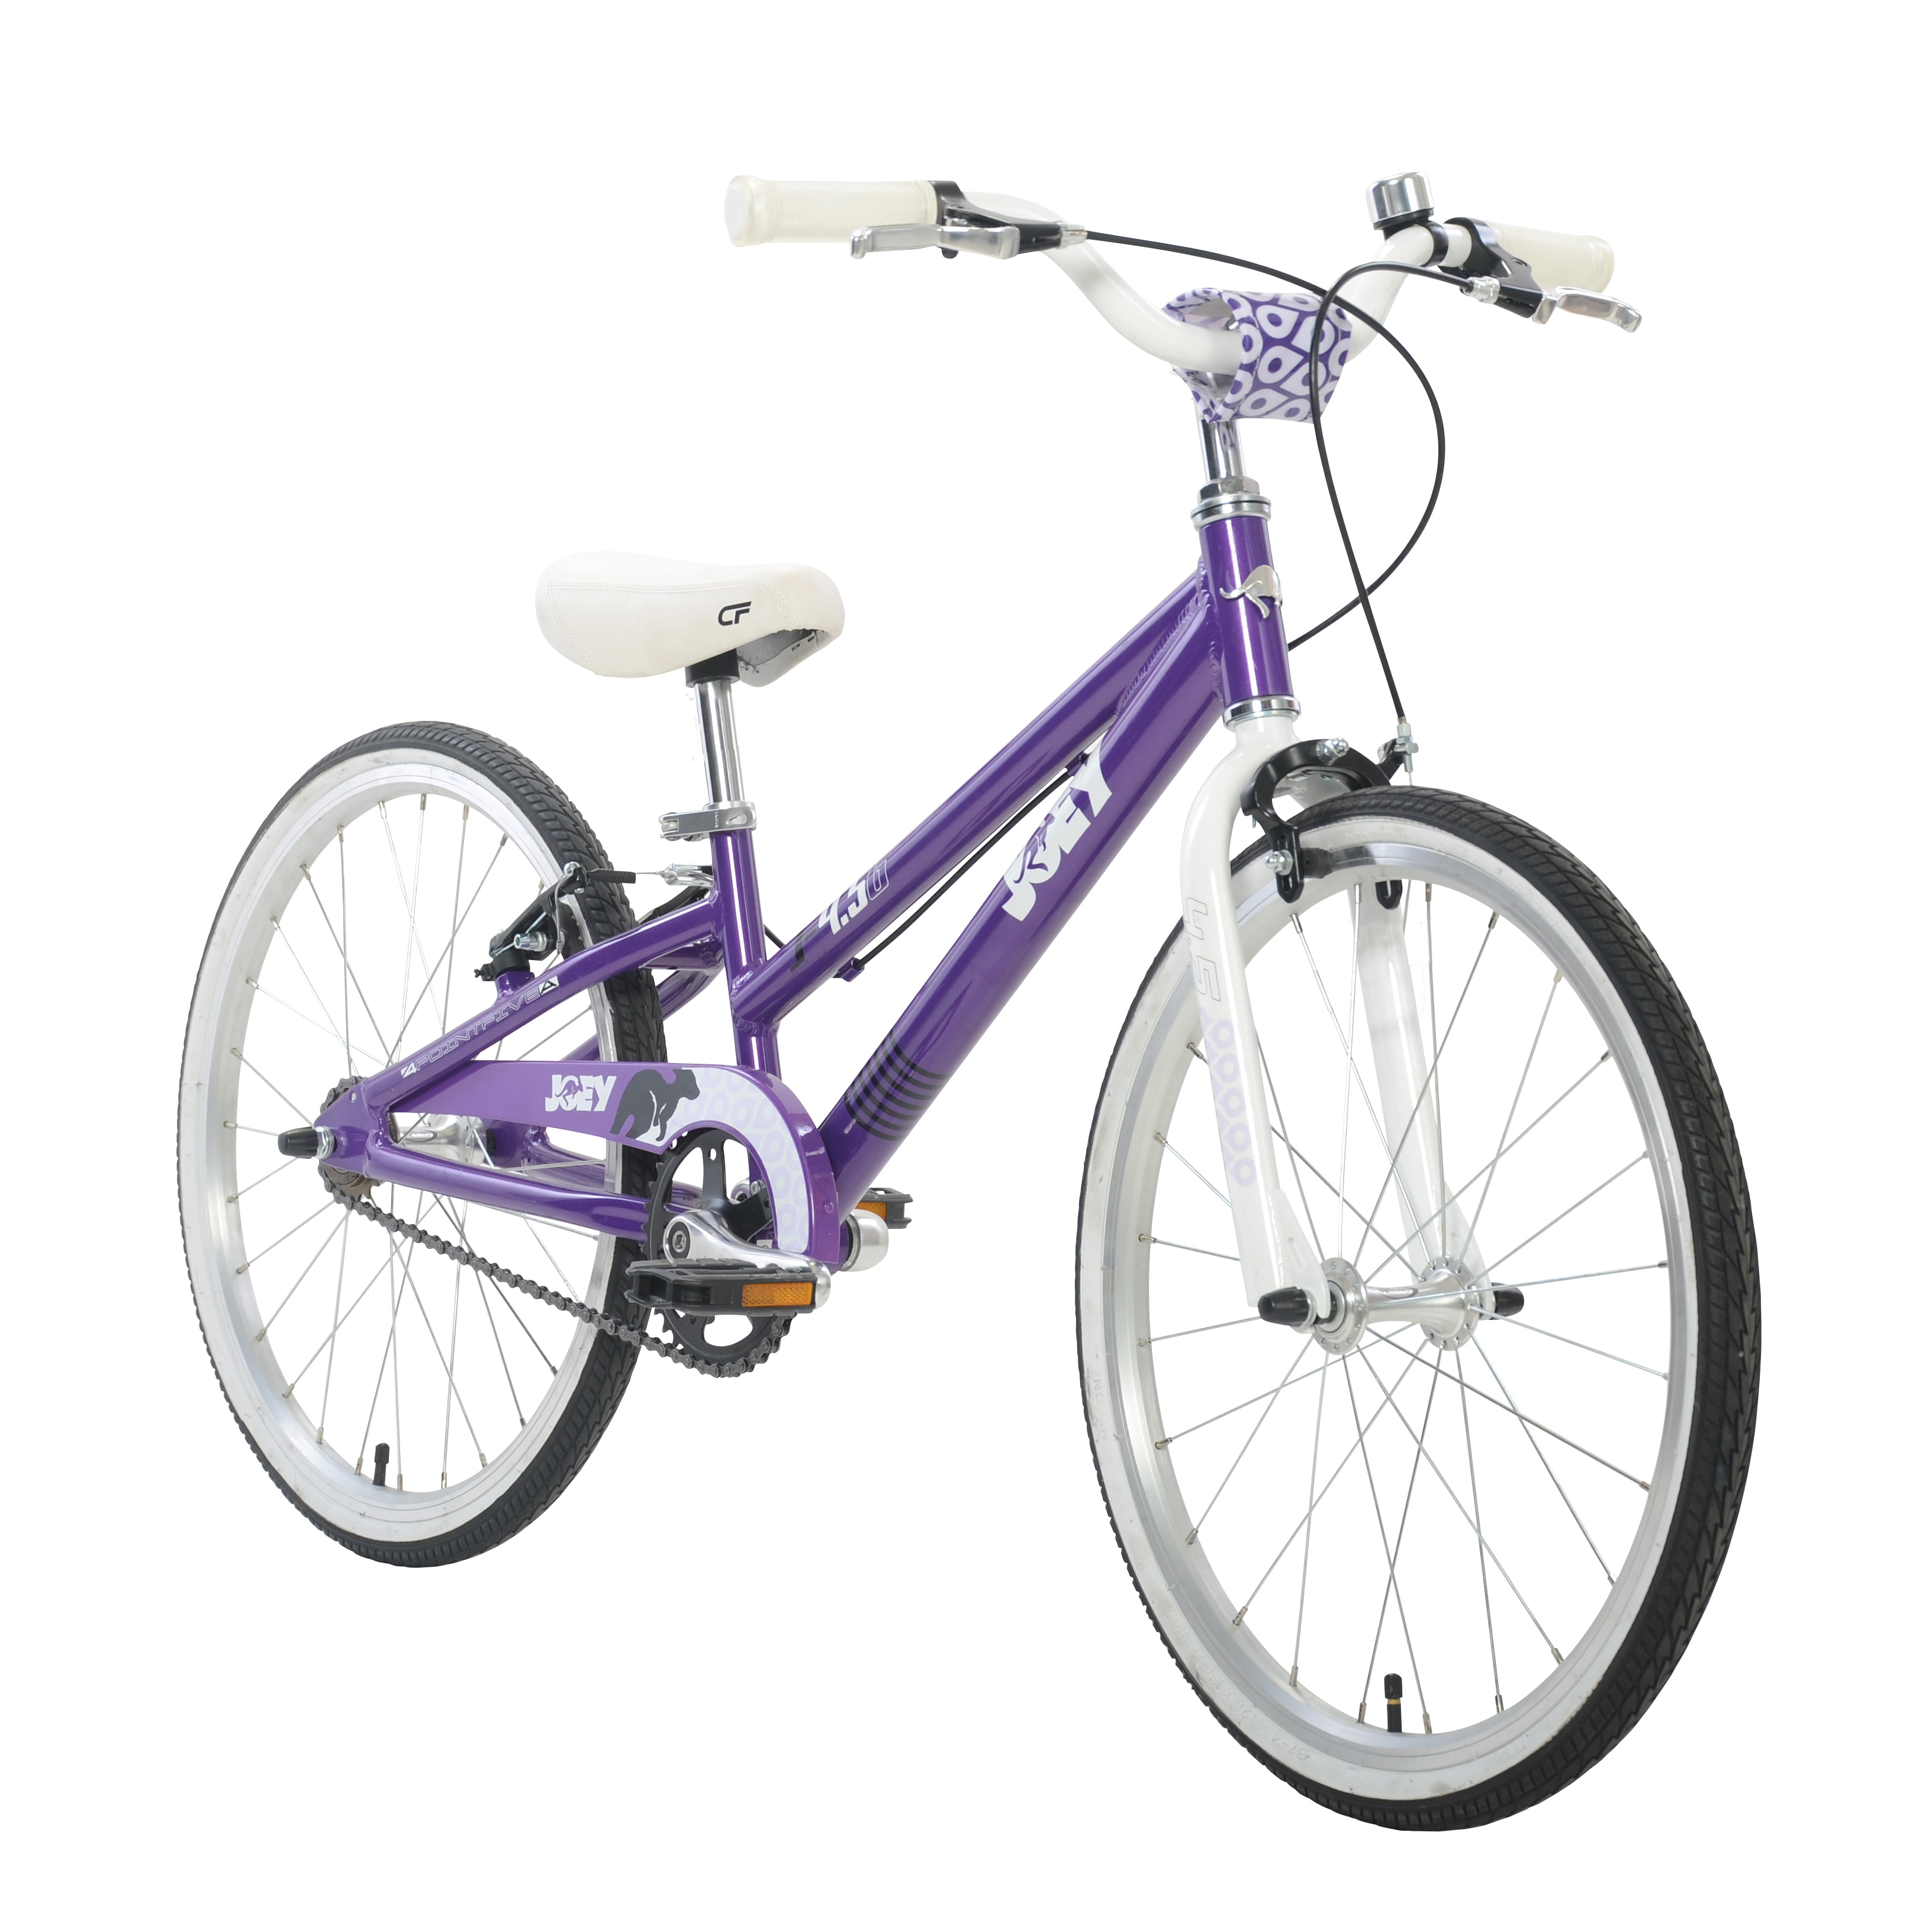 Joey 4.5 Ergonomic Kids Bicycle, For Boys or Girls, Age 5 and up 